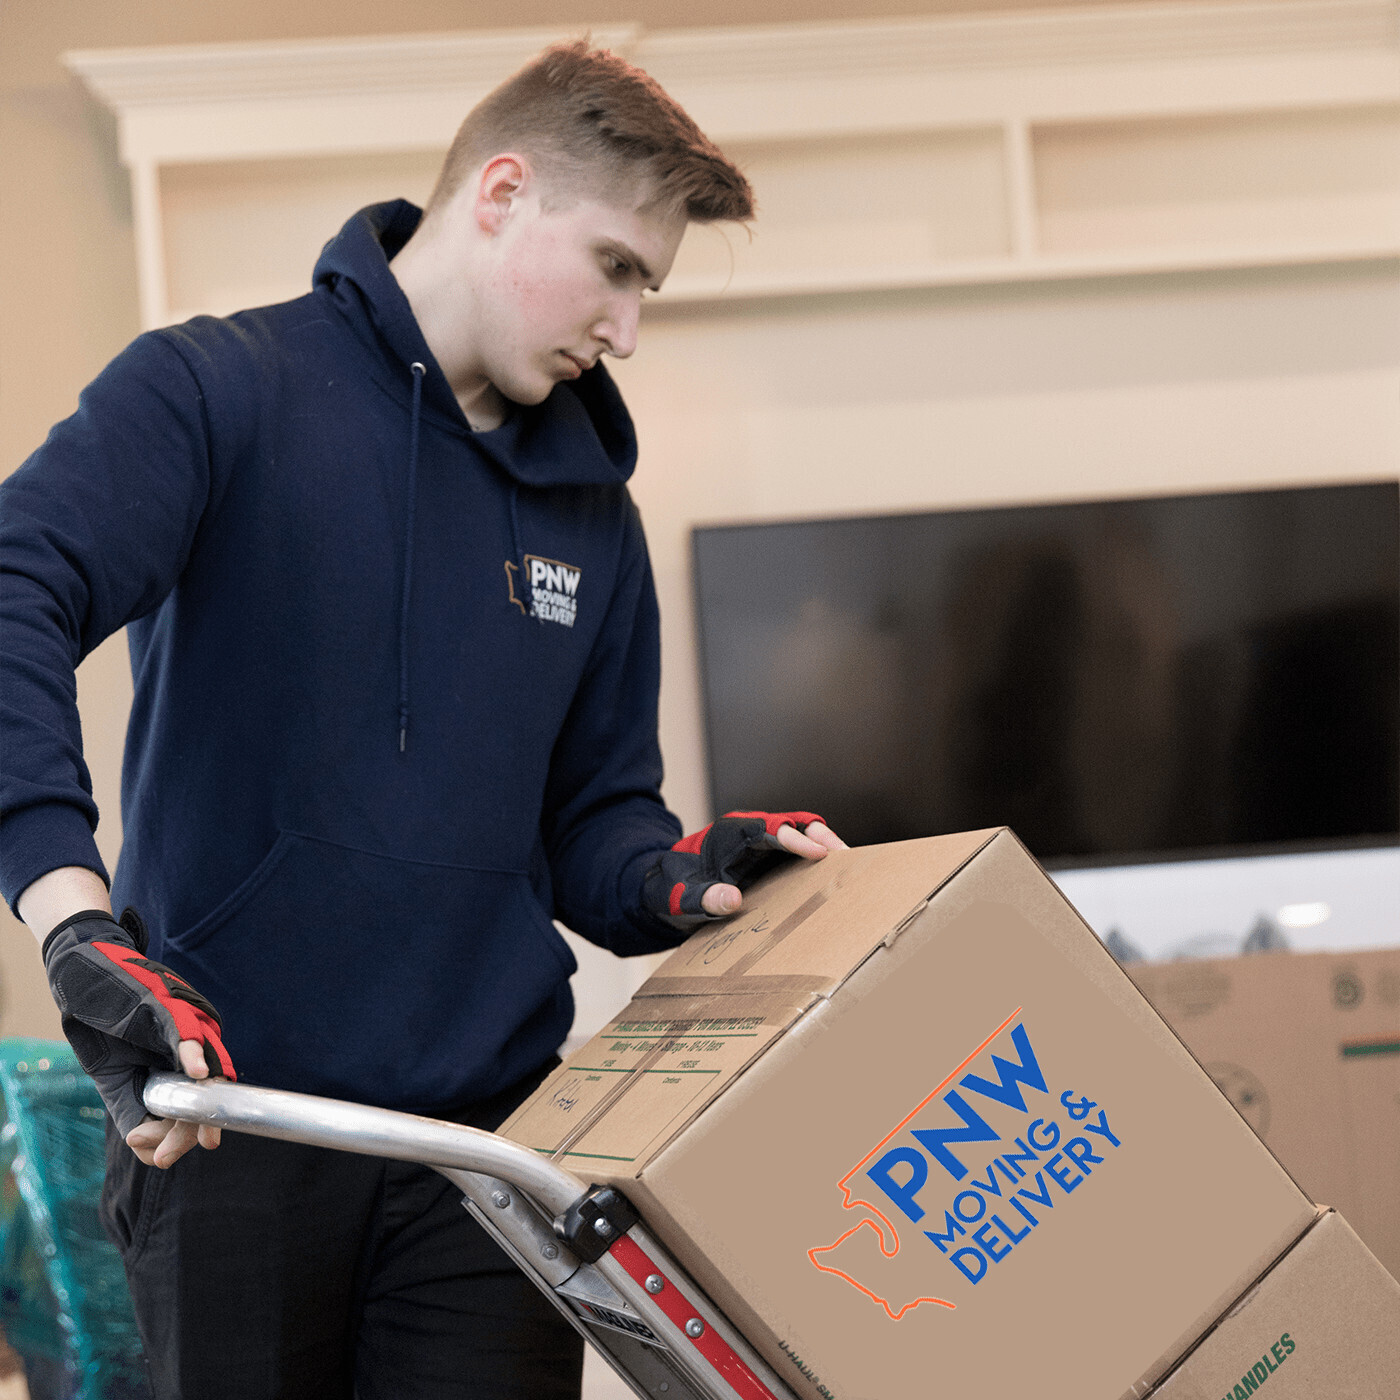 PNW Moving and Delivery, based in Tacoma, WA offers full-scale local and long-distance moving services, packing services and labor-only services in Tacoma, Gig Harbor, Auburn, Kent, and Ruston in Washington